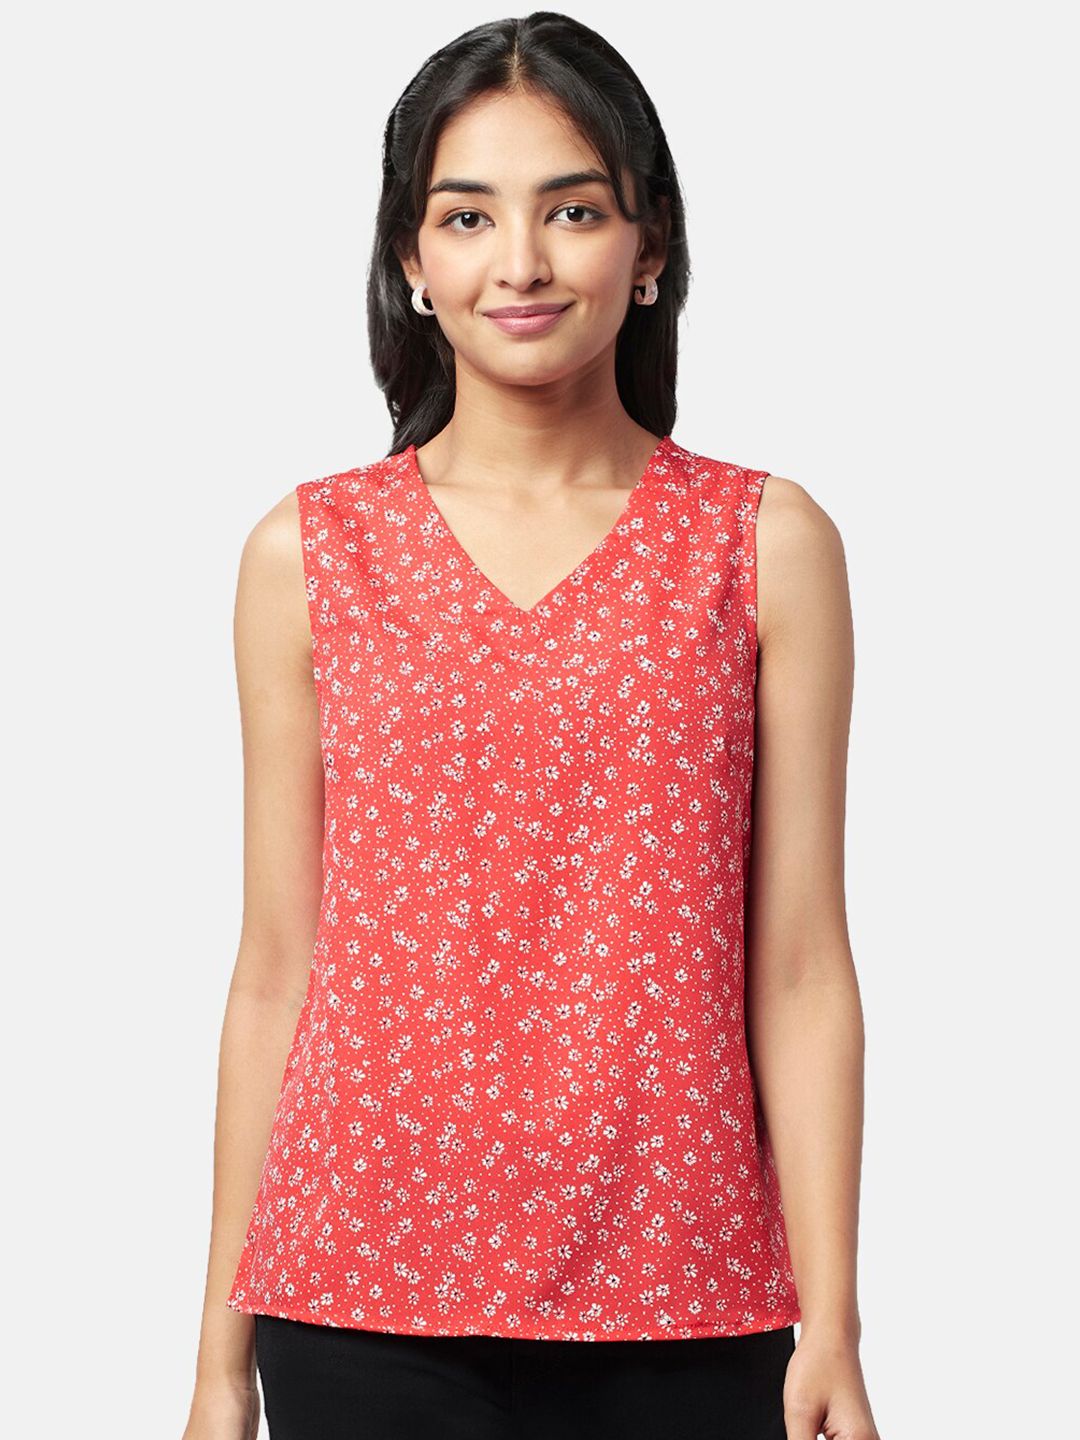 YU by Pantaloons Floral Print V-Neck Top Price in India